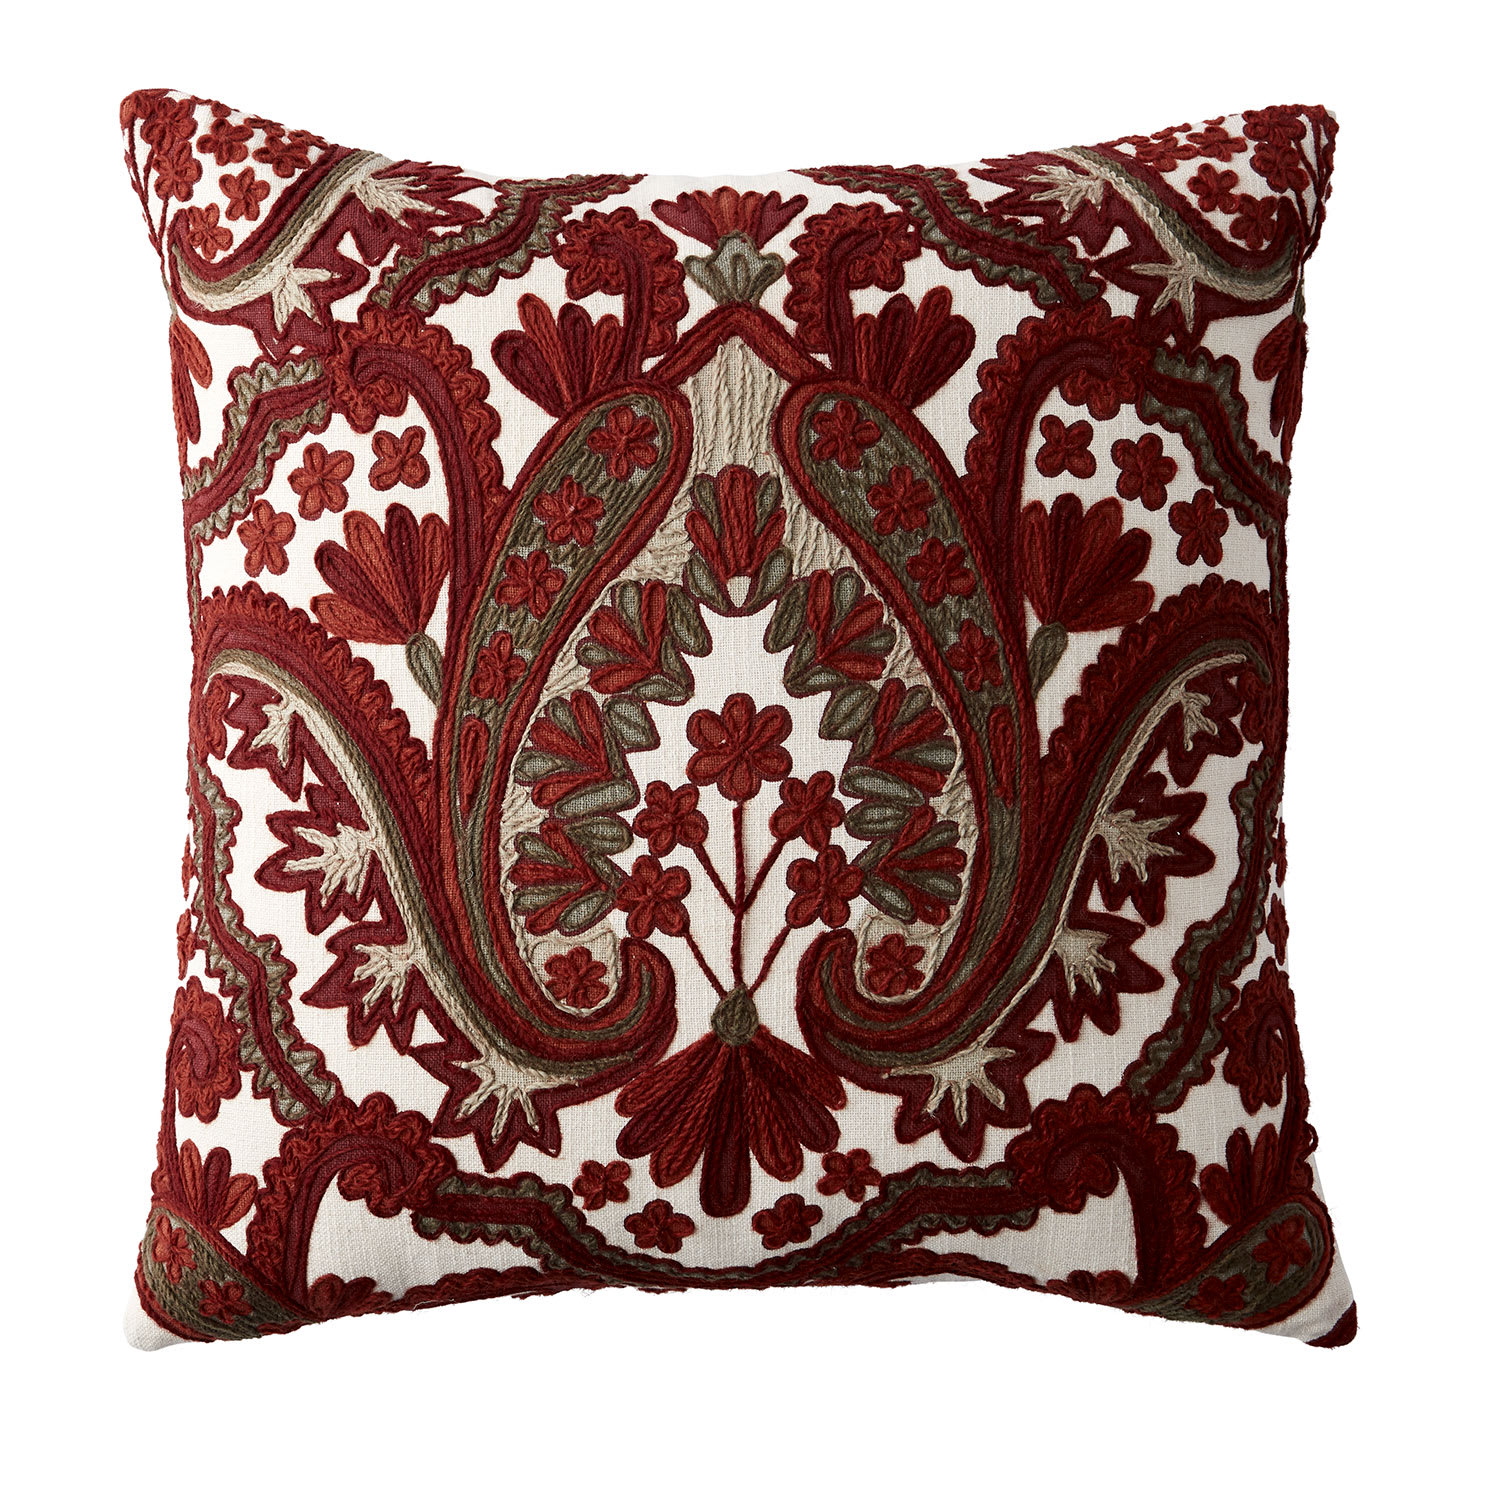 Red Multicolored Embroidered Damask Pillow Cover - Emb Damask